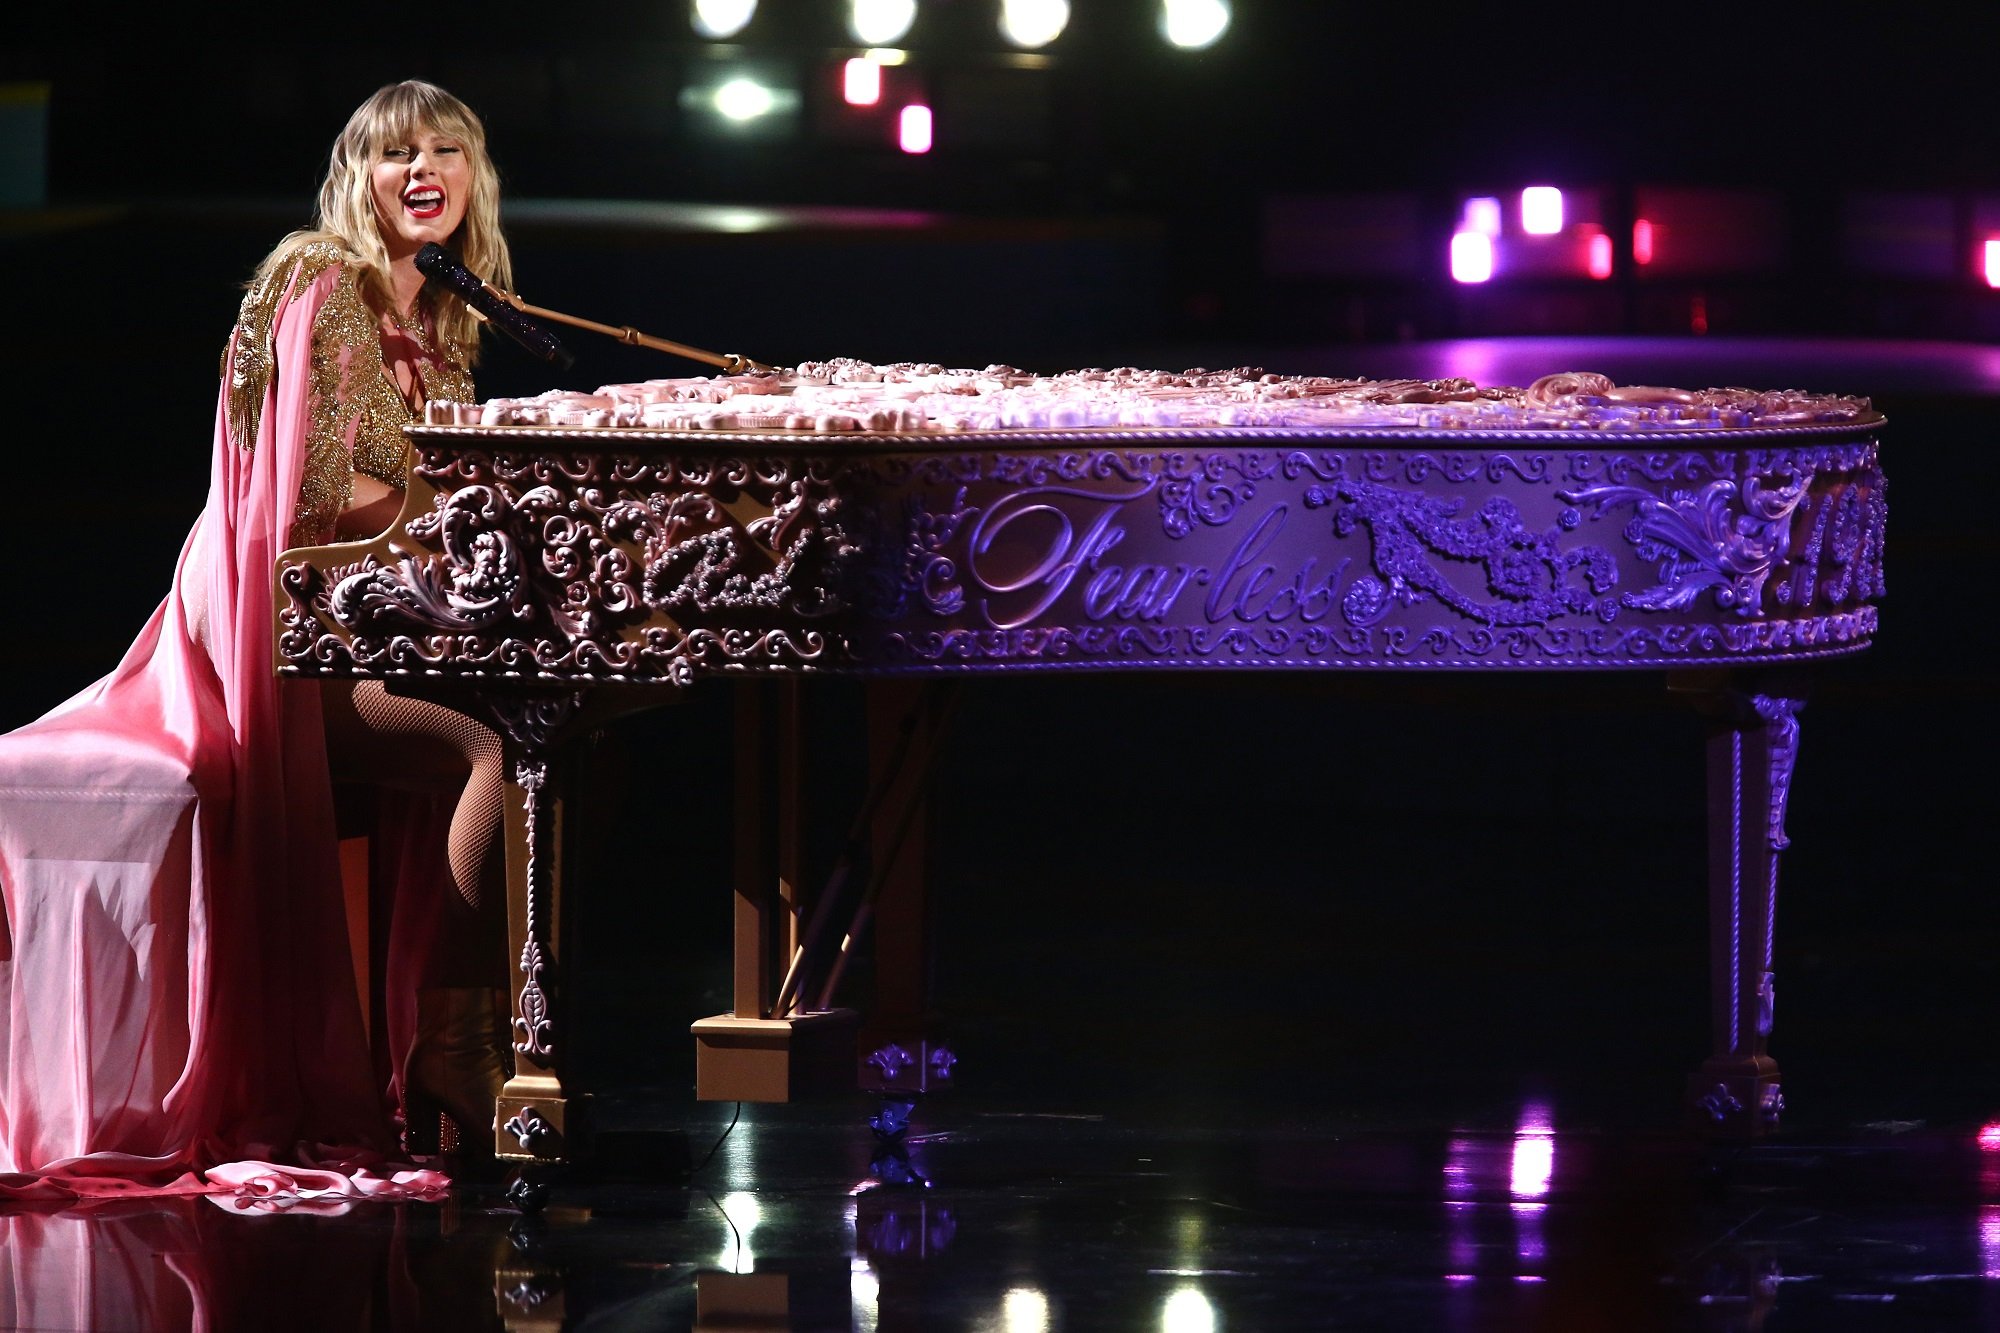 Taylor Swift performs while playing the piano during the 2019 American Music Awards